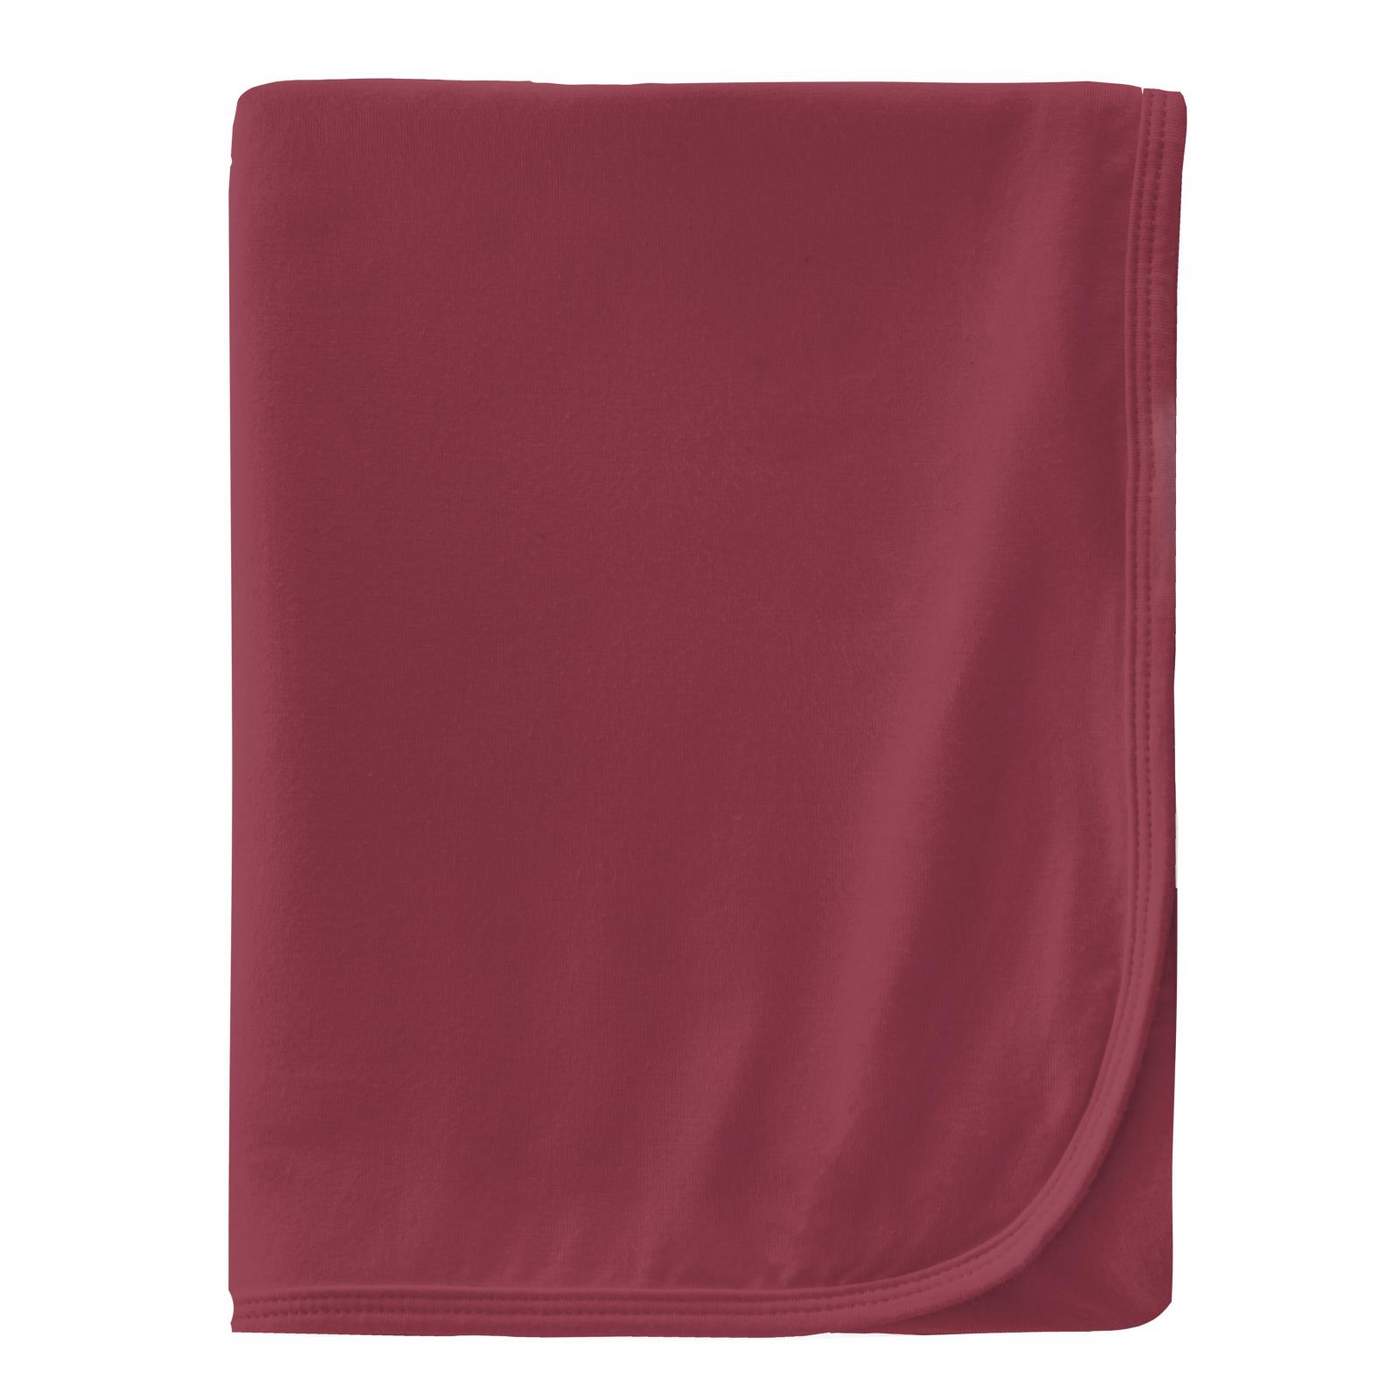 Bamboo Swaddle in Wild Strawberry